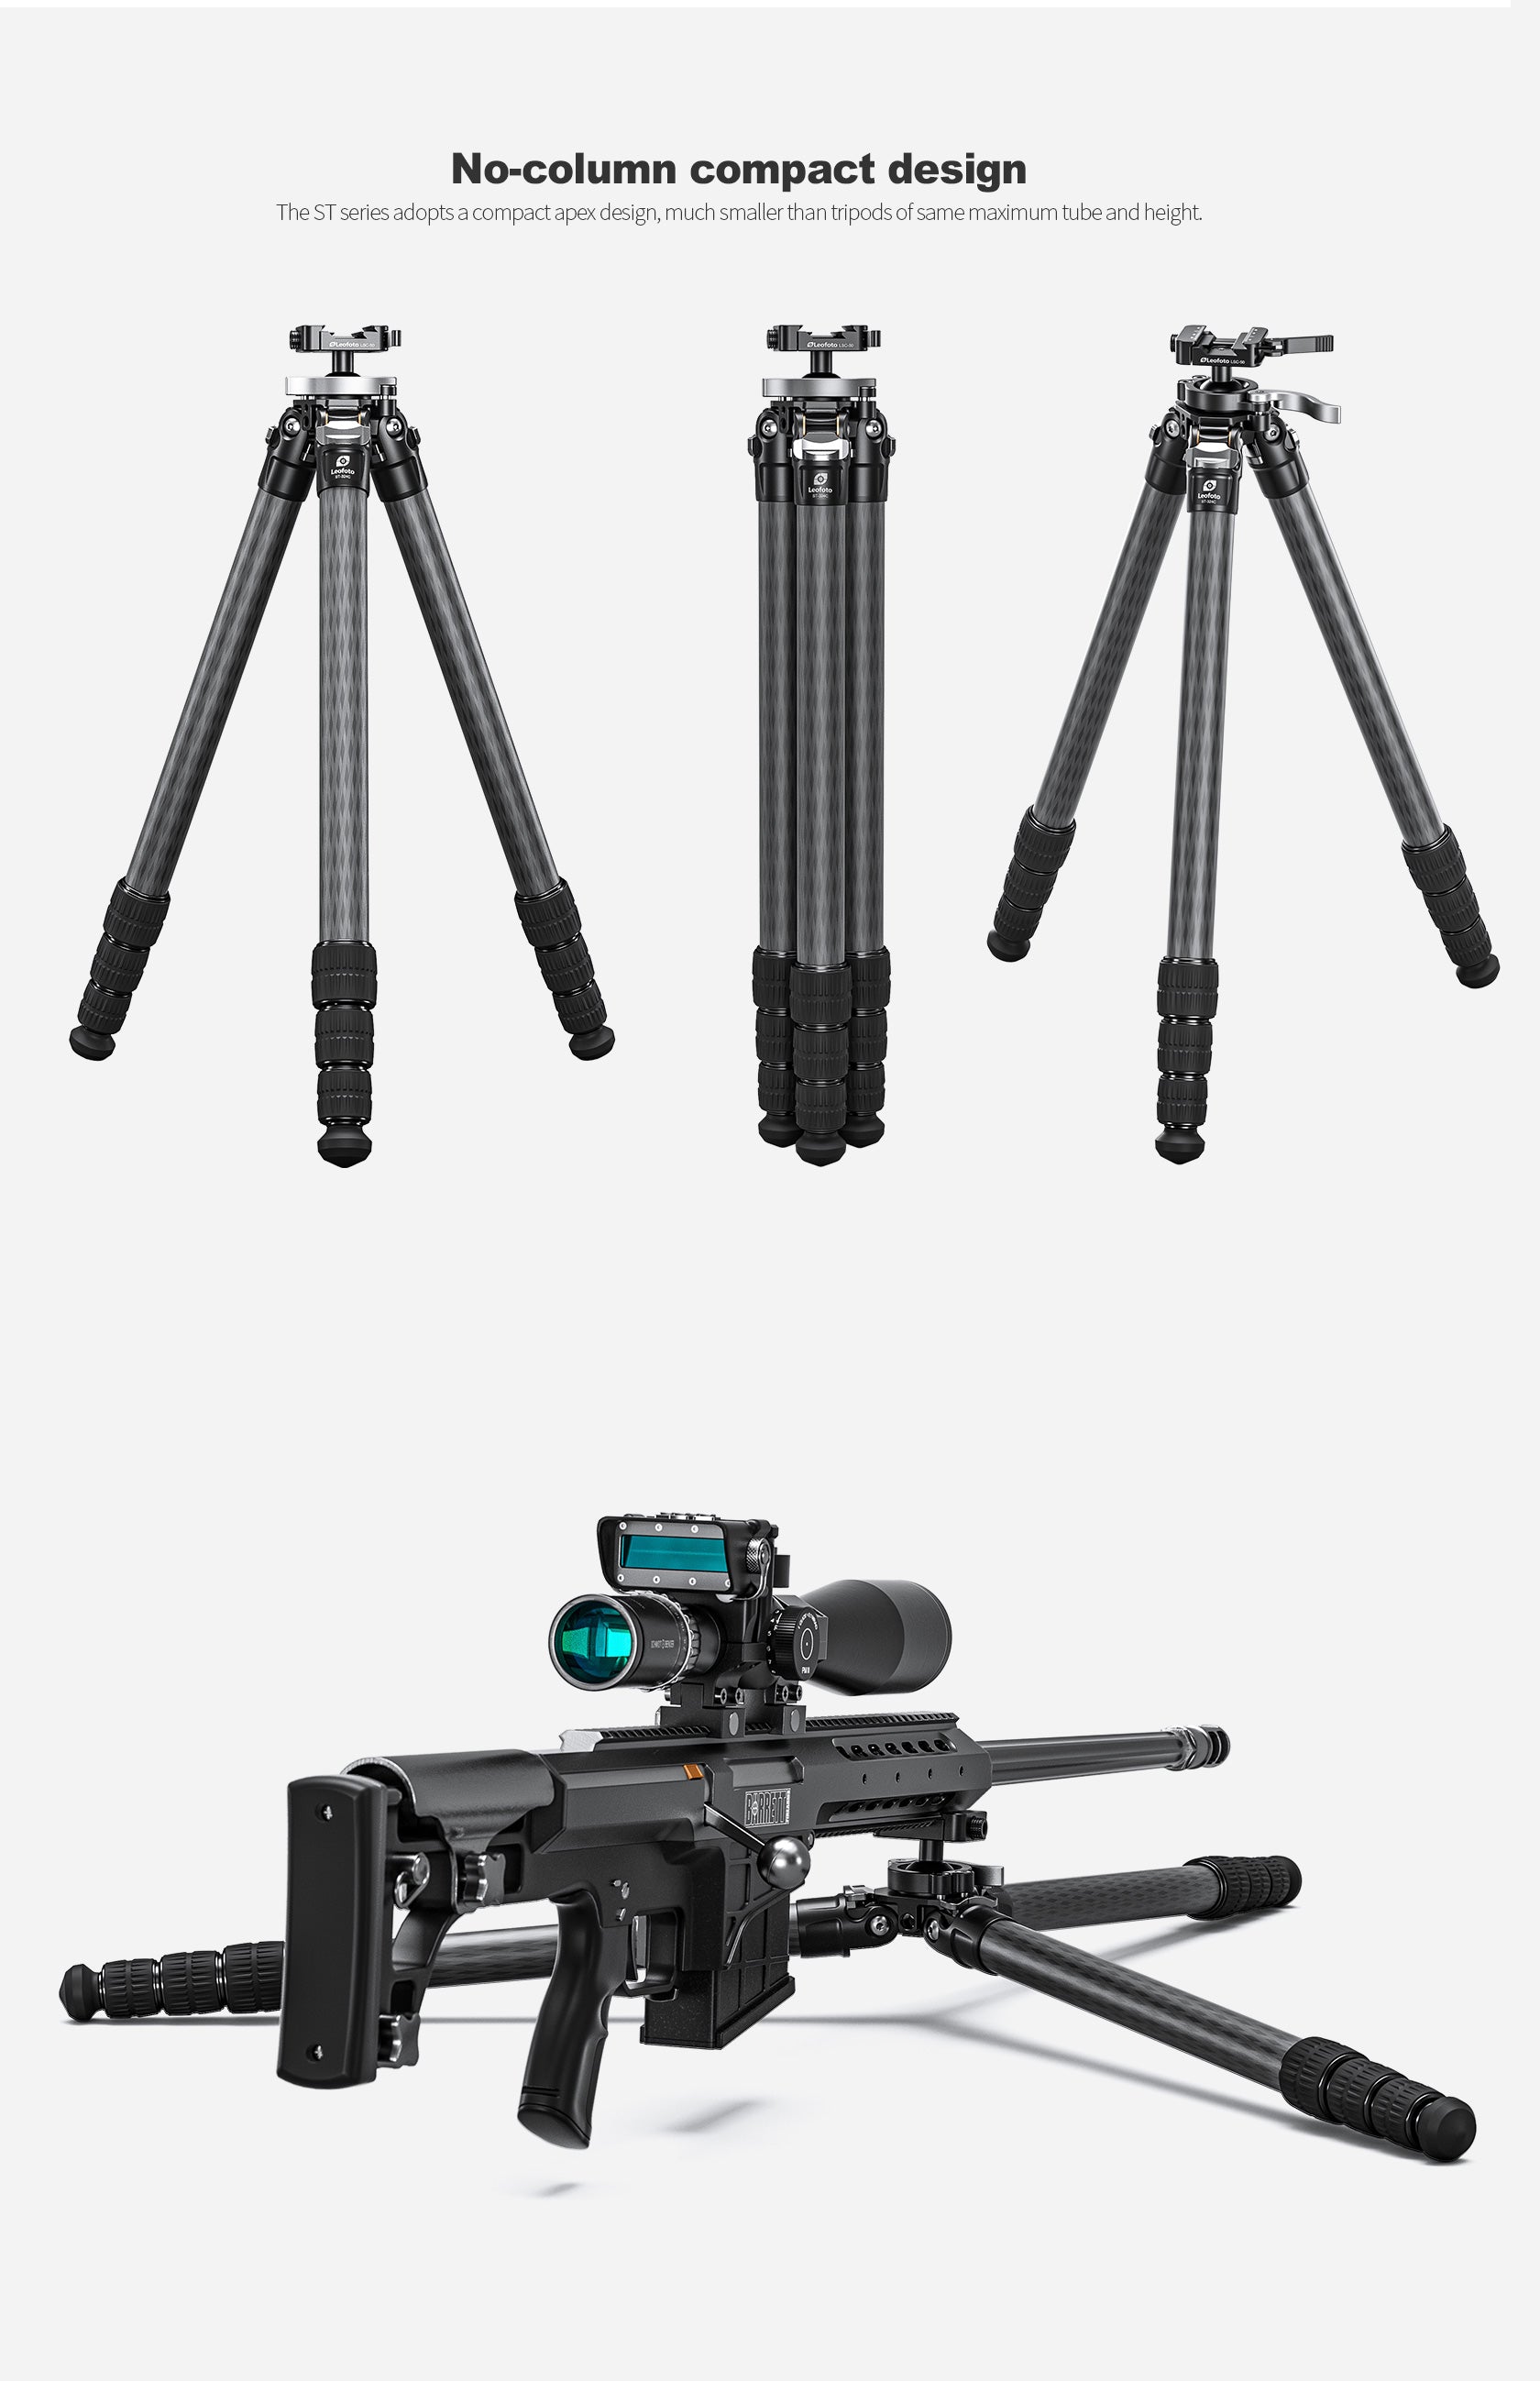 Leofoto ST-324C/ ST-324CL(Long)/ ST-364C/ ST-364CL(Long) Outdoors Tripod with Integrated Lever-Control Ballhead | Lever-Release Clamp